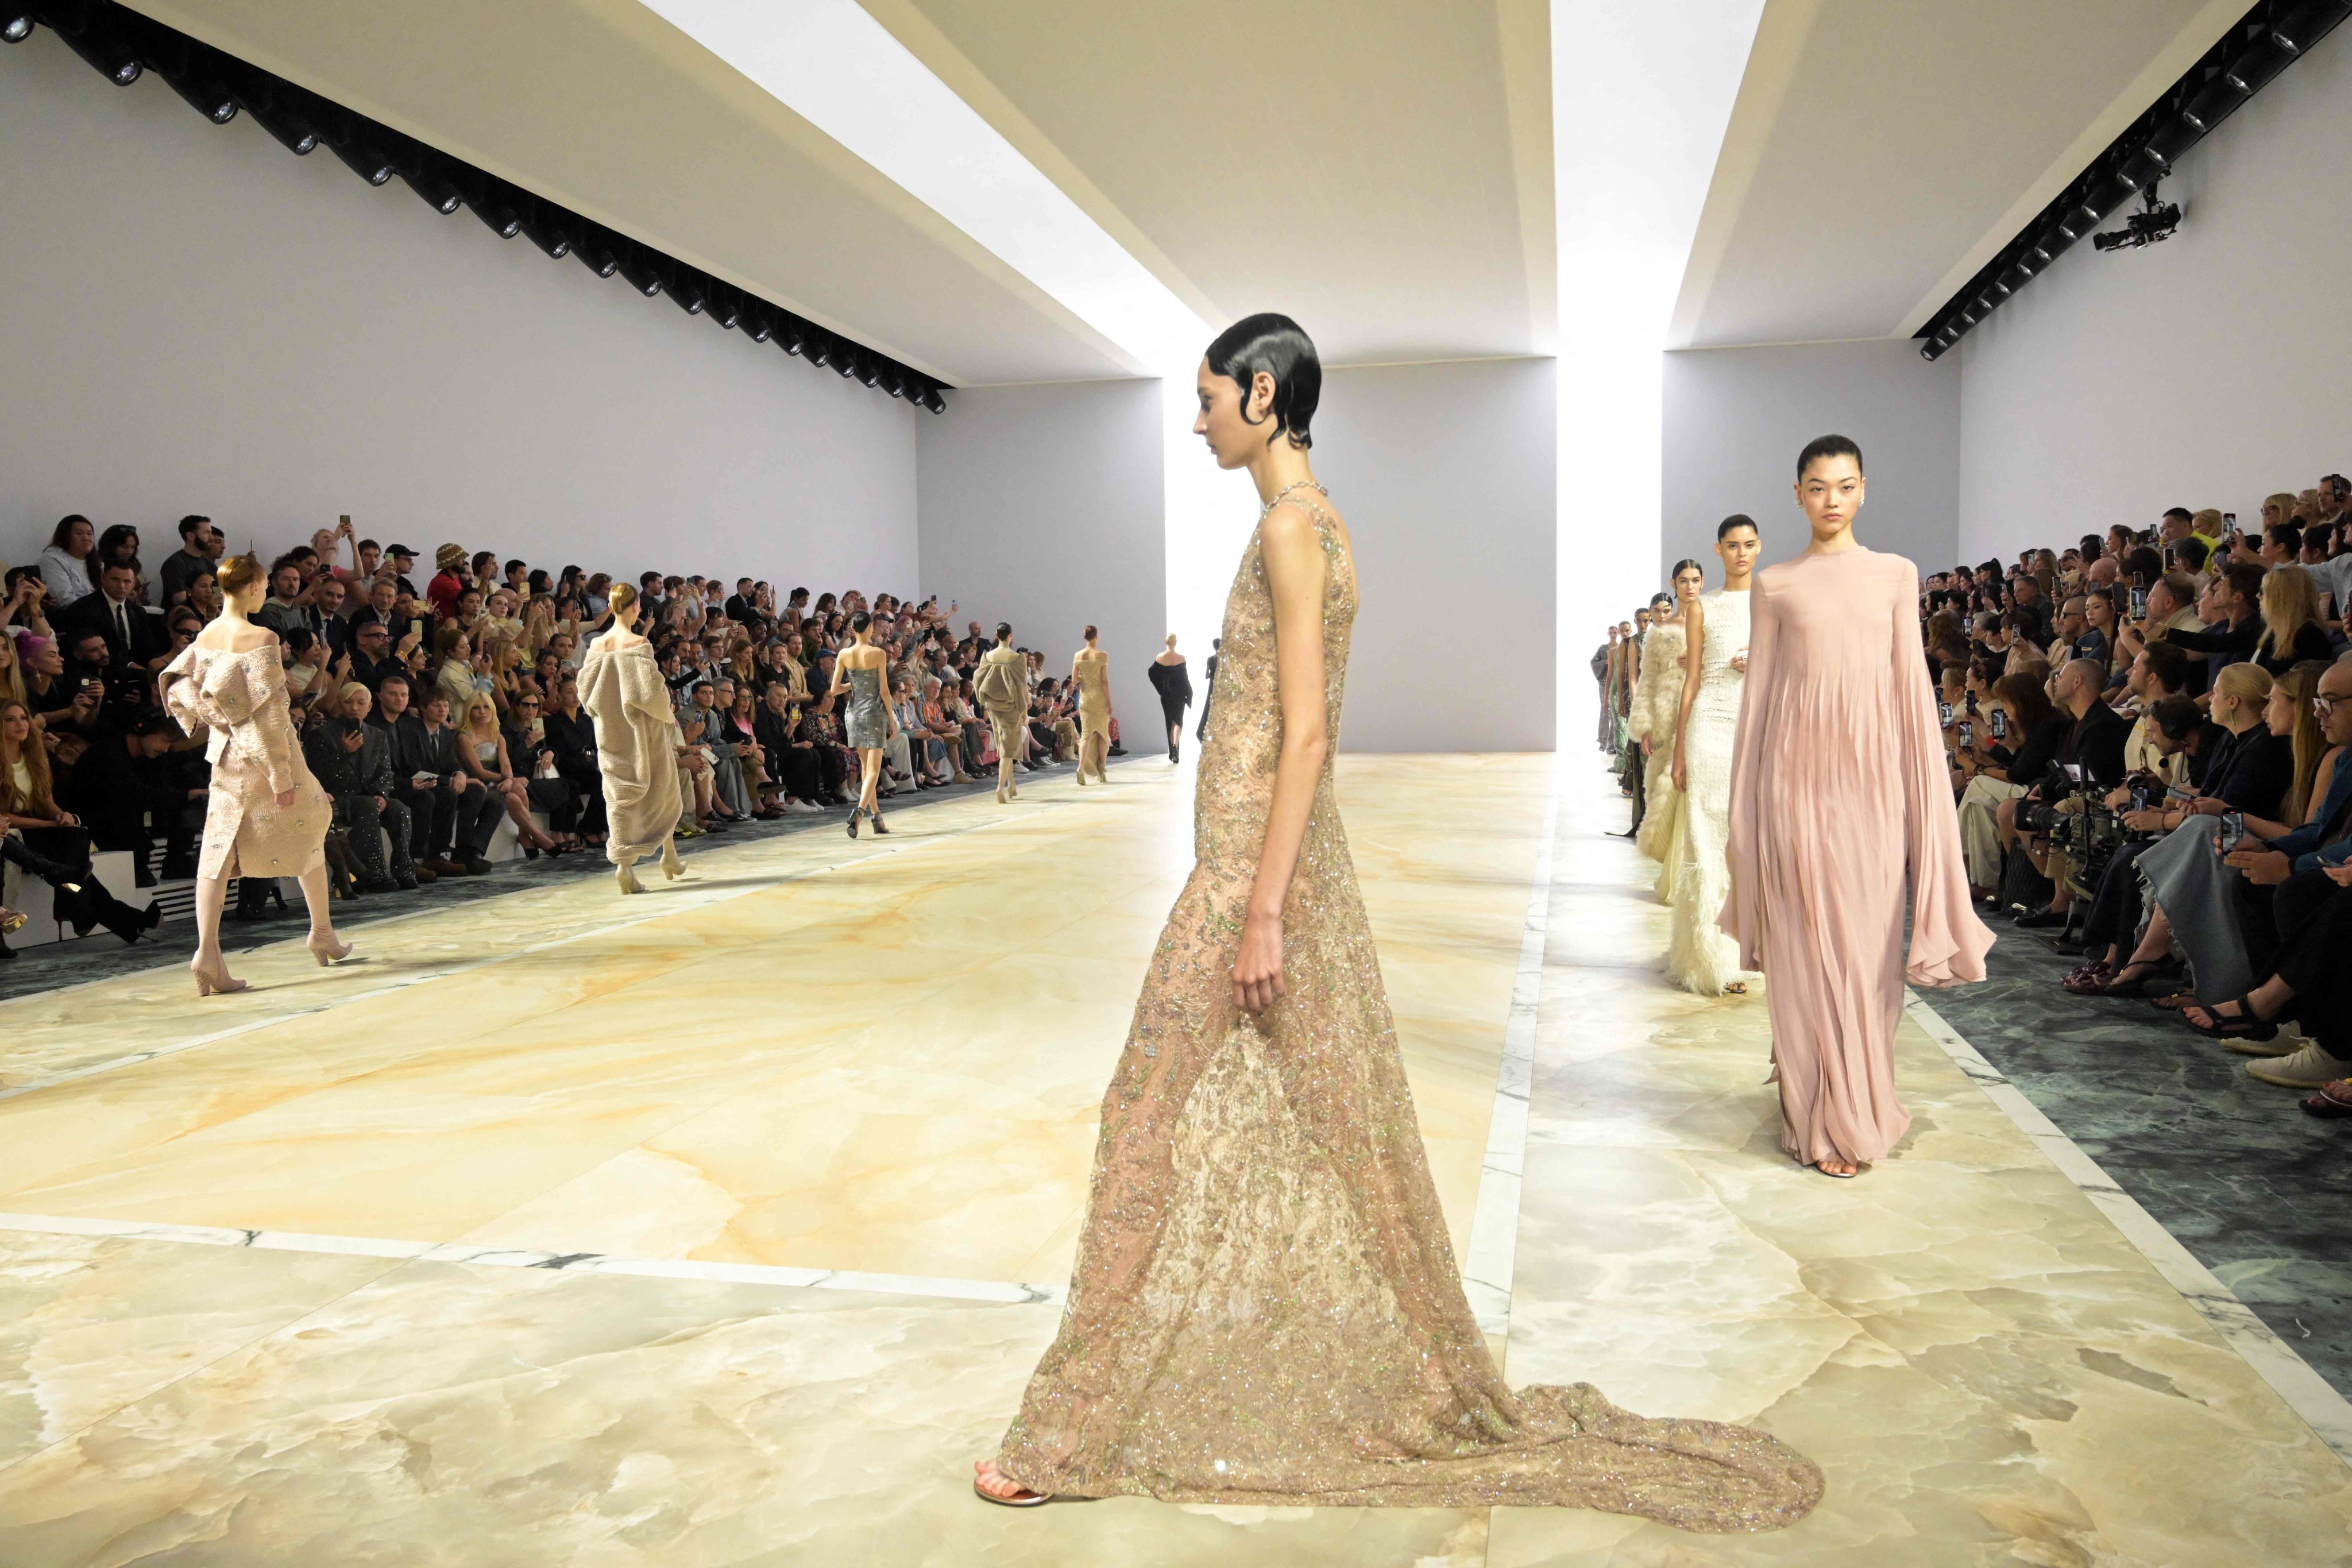 Models present an initial parade of nude creations by Kim Jones at Fendi during the Women’s Haute-Couture Fashion Week in Paris on July 6. Photo: AFP